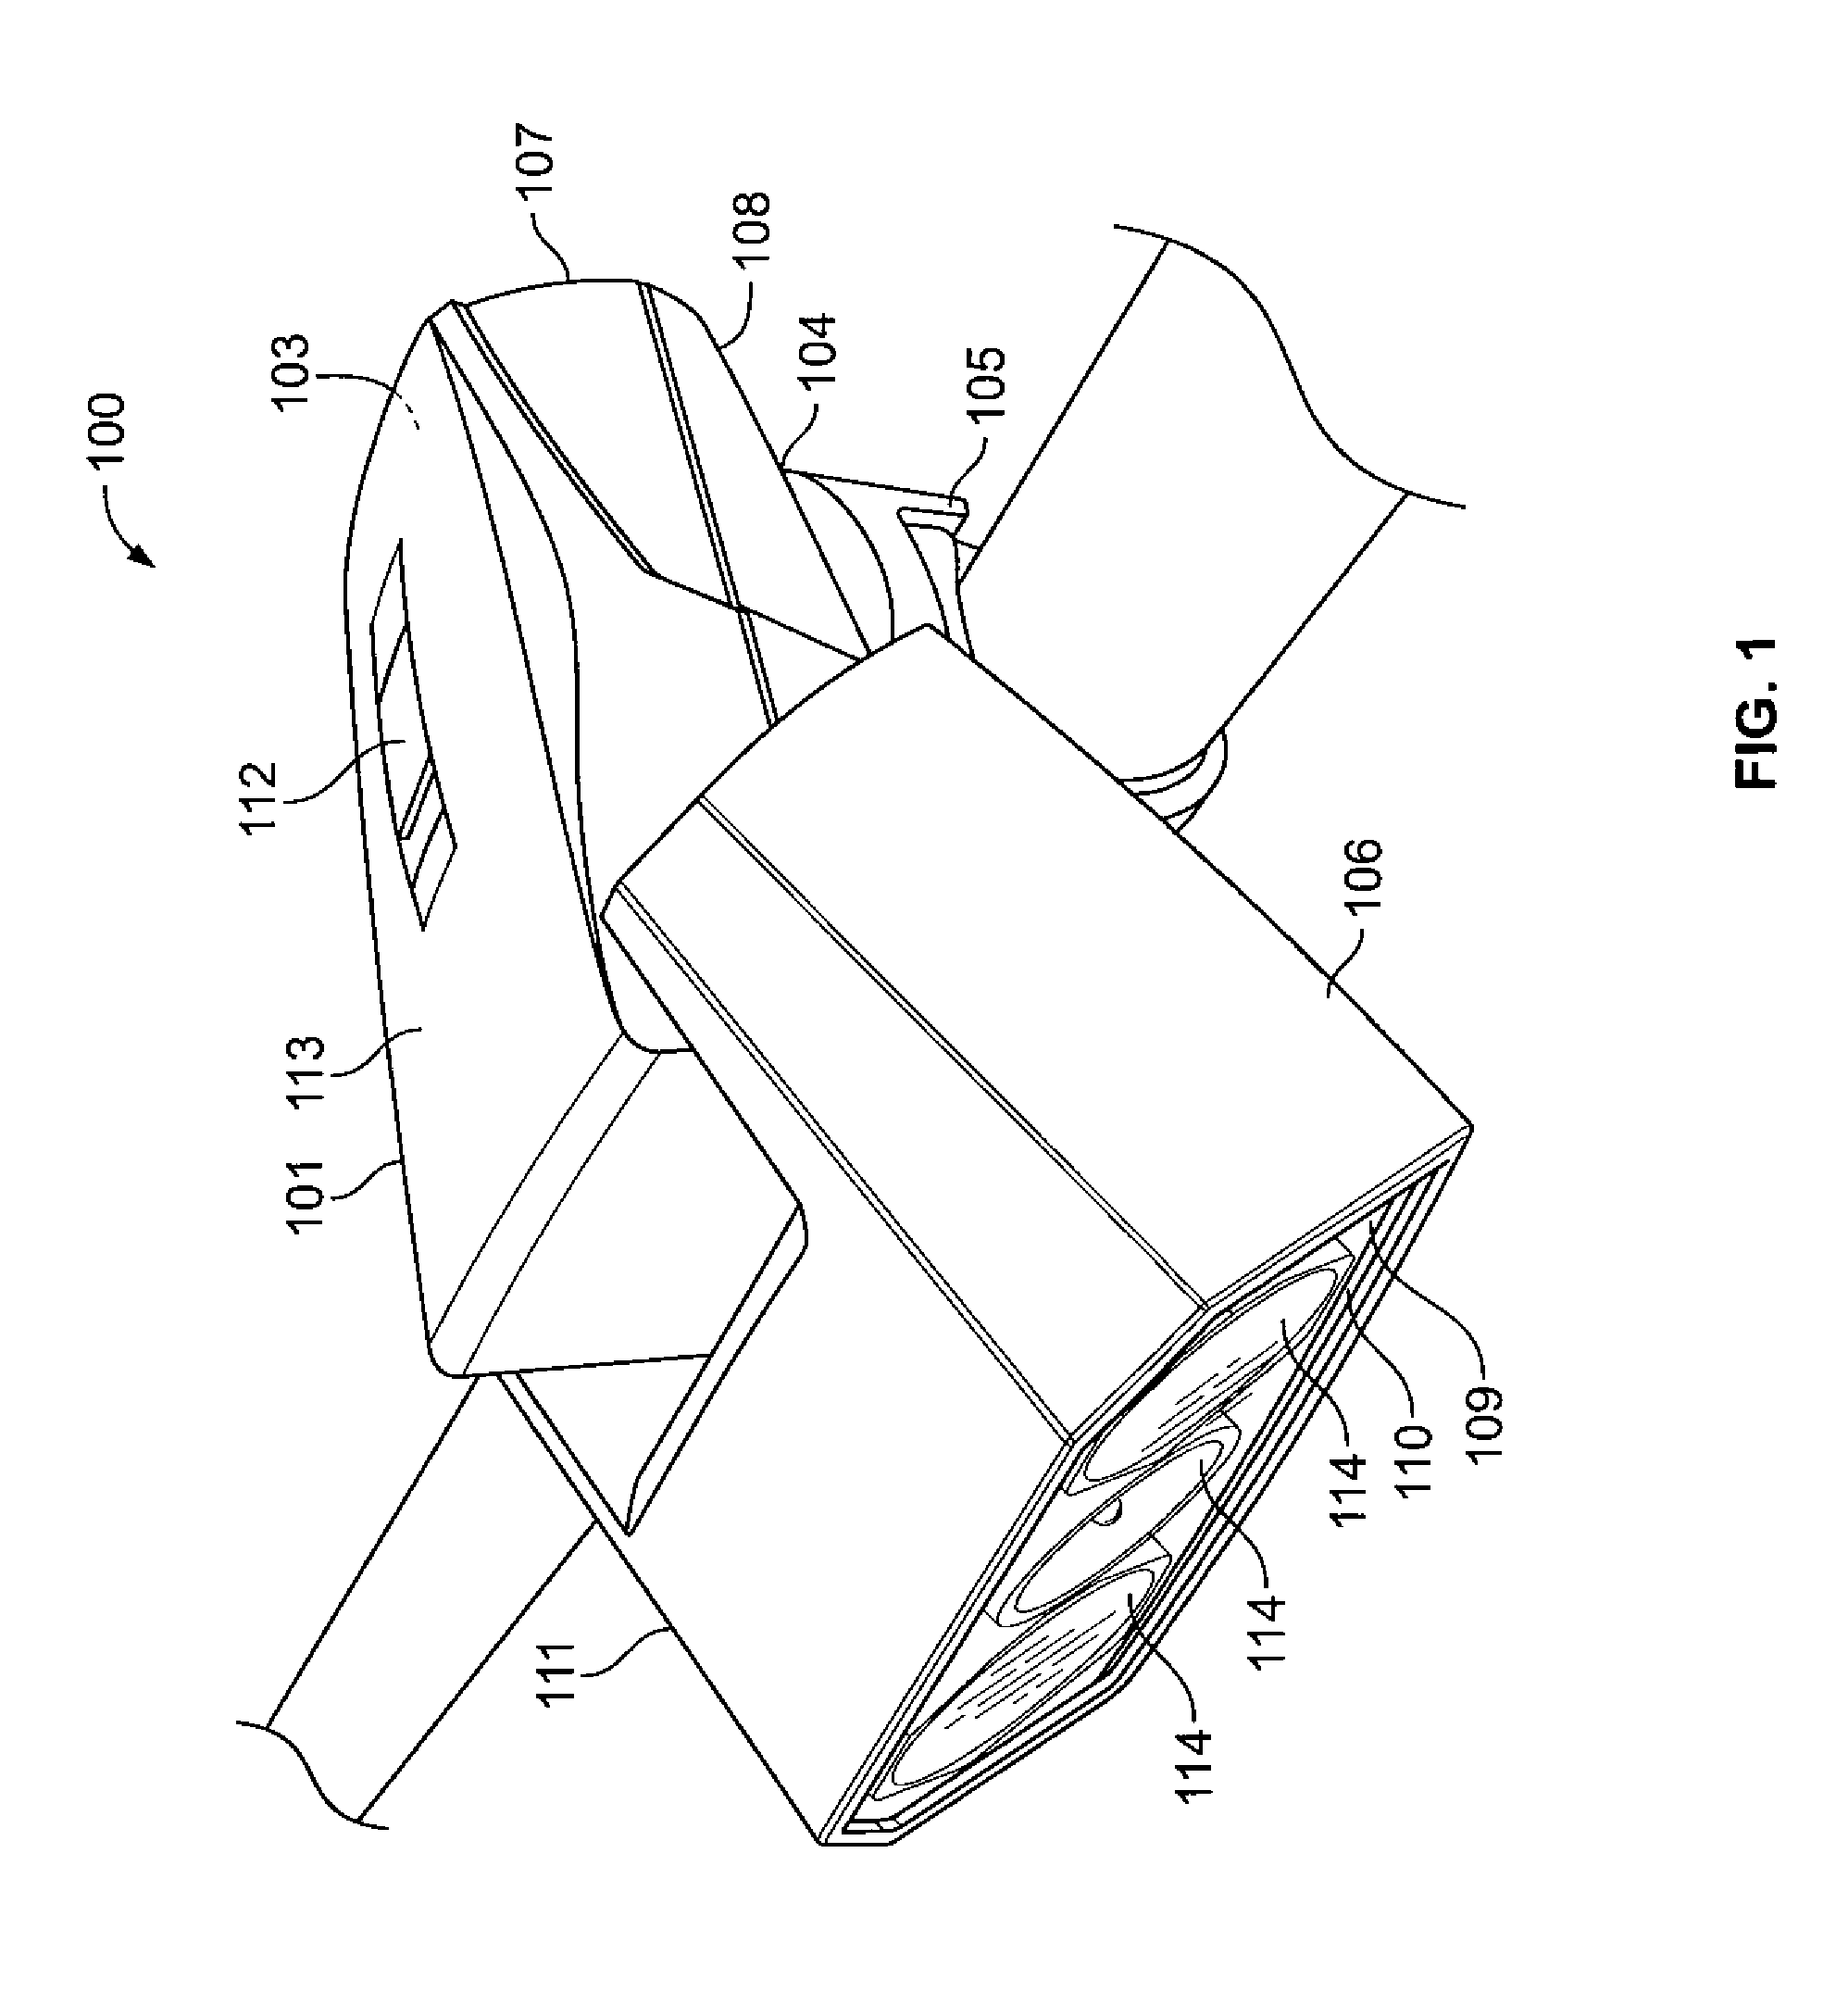 Pivotable LED lighting apparatus and universal mounting assembly and method